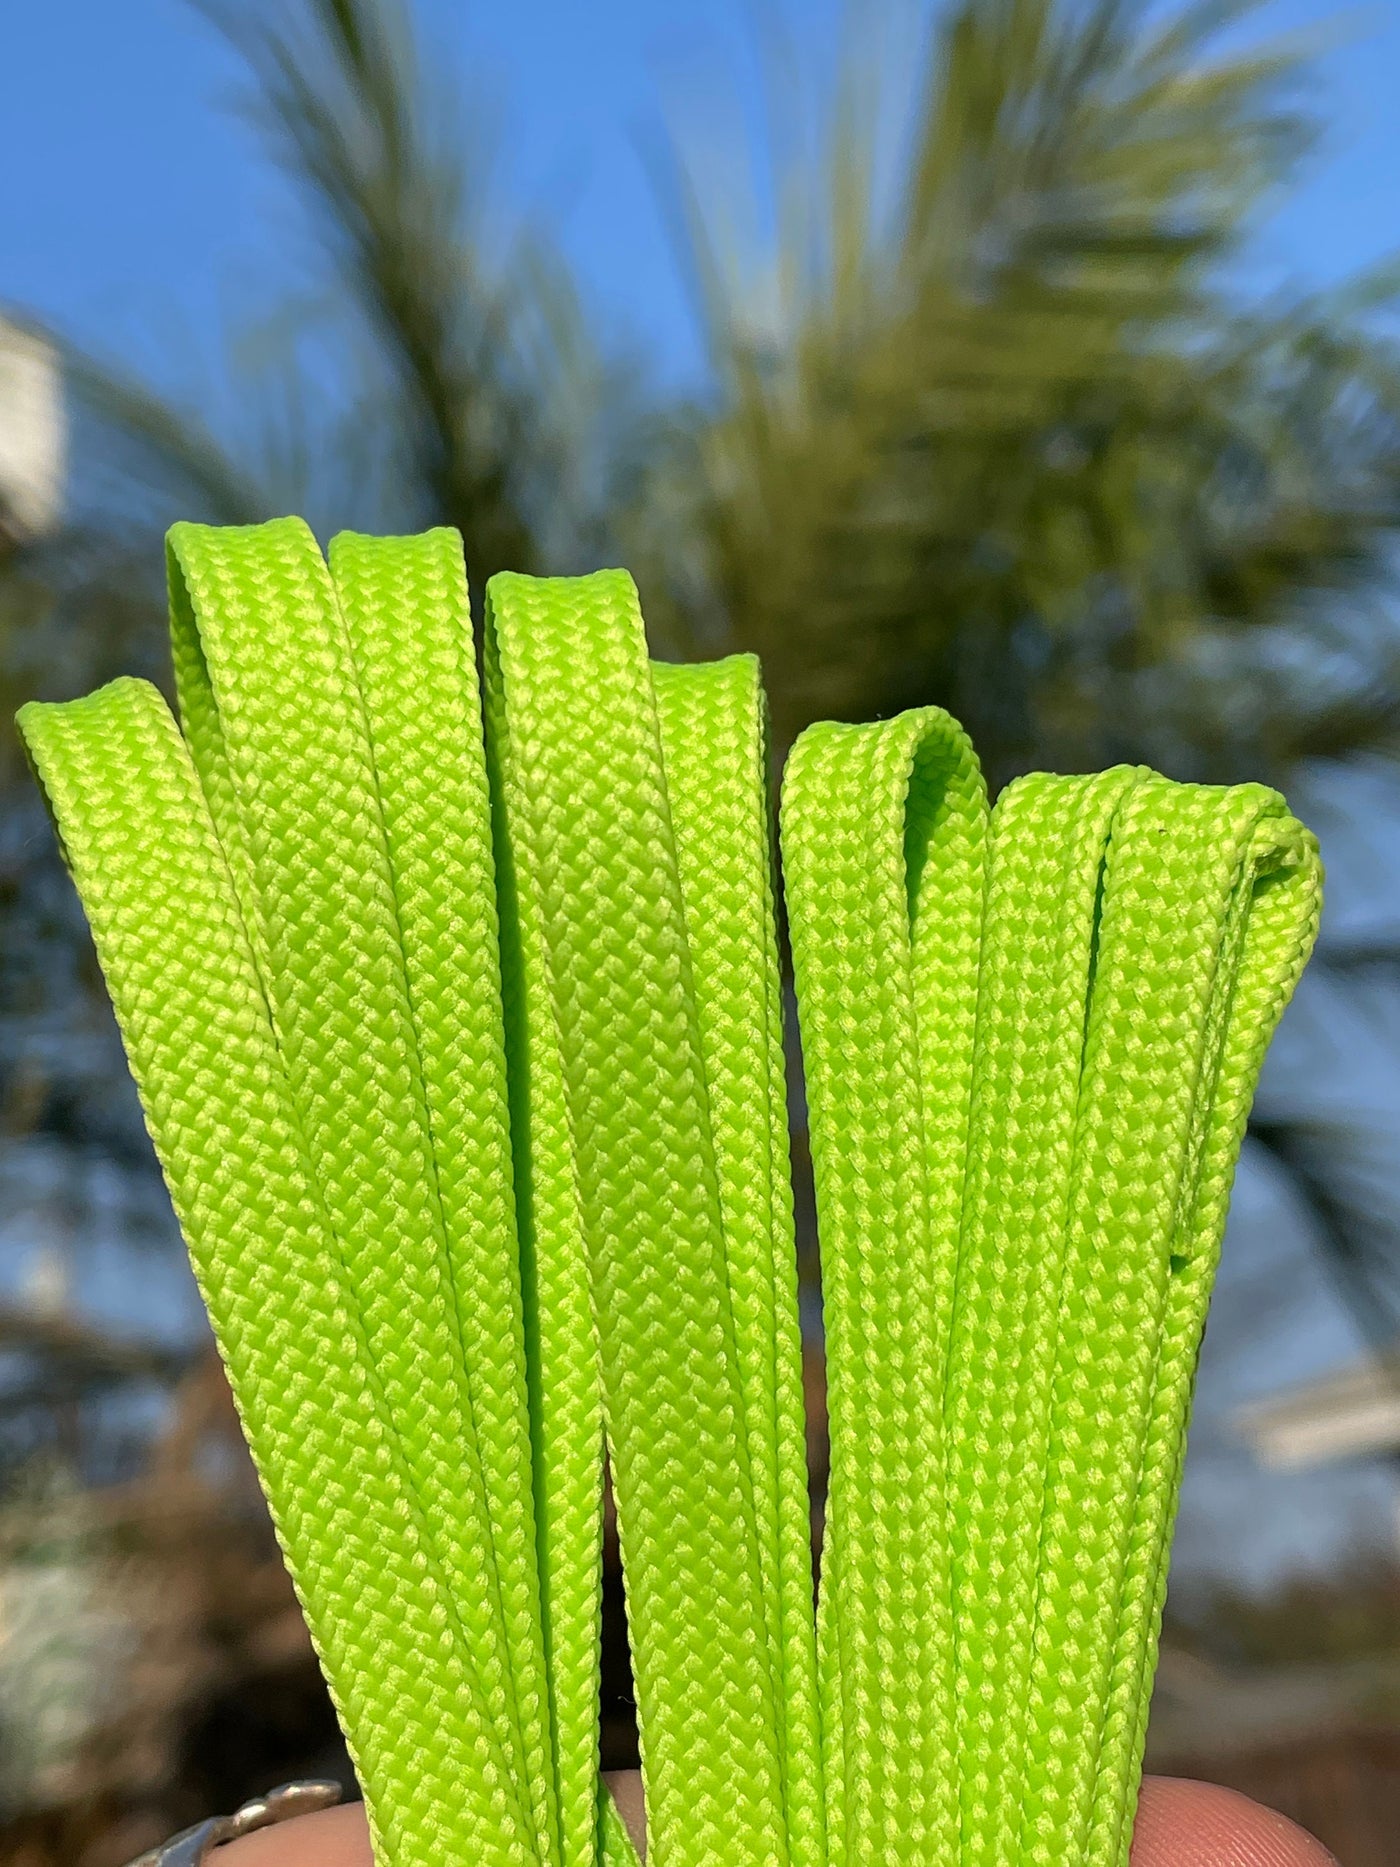 Lime Green 96 inch CORE Roller Skate Laces (Narrow 6mm)